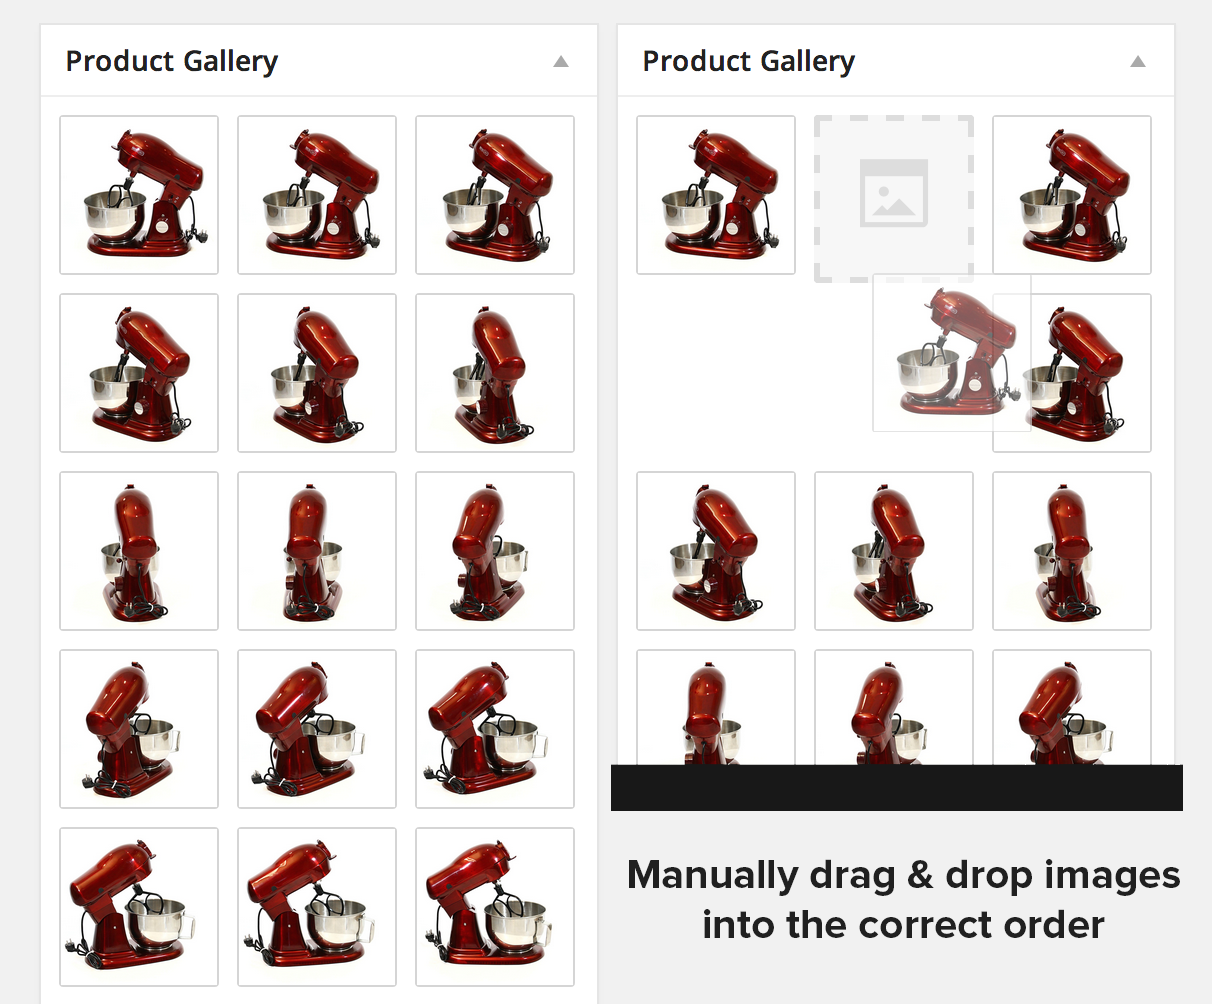 It's very easy to drag & drop images into order w ithin the Product Gallery meta box if need be!